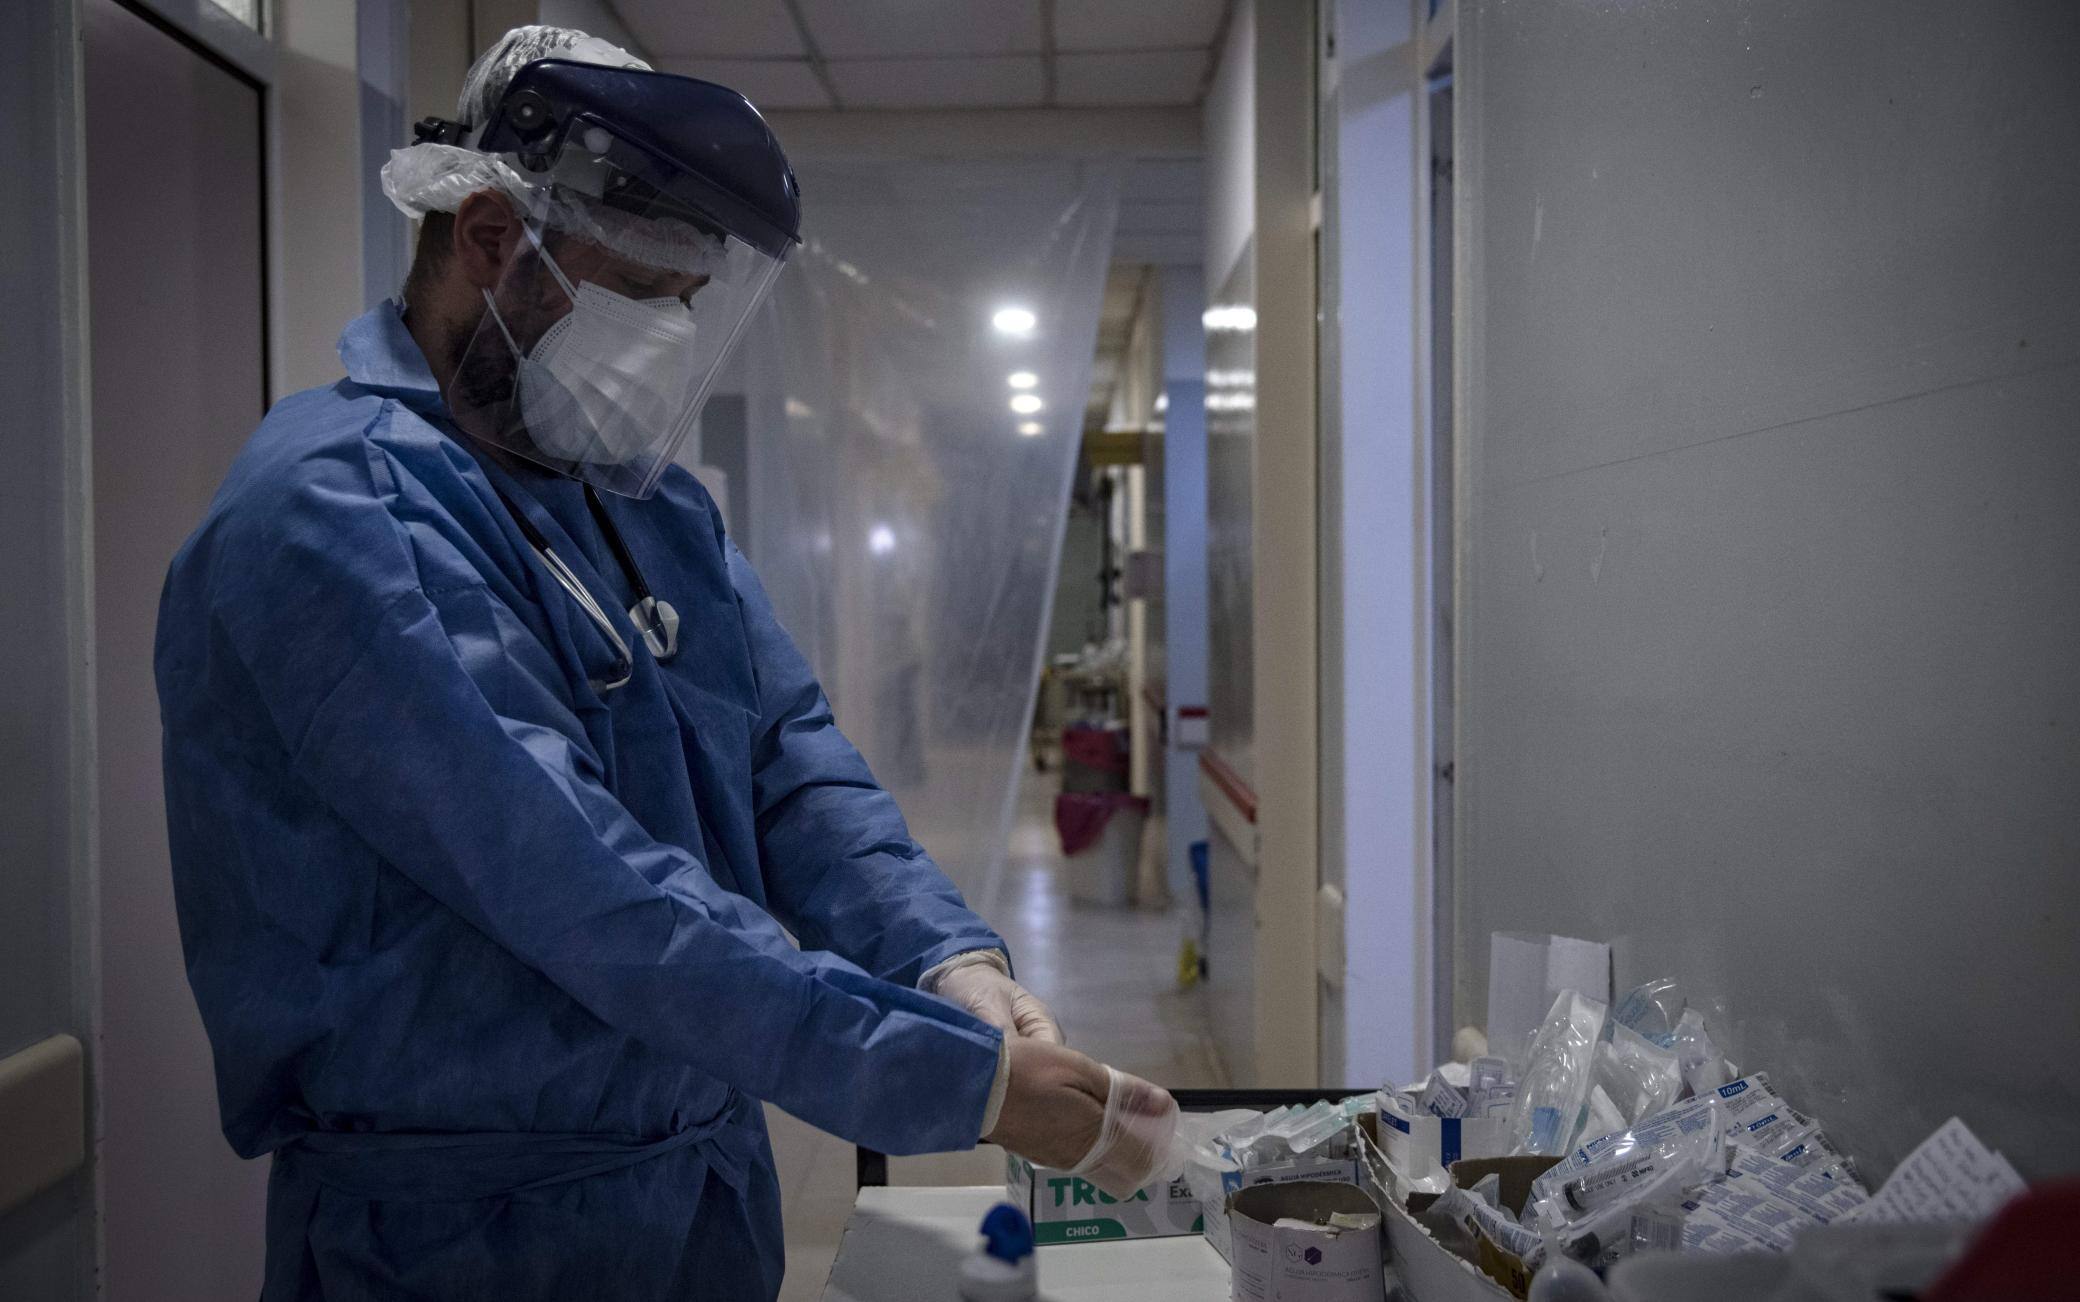 Dr Mario Grossmann wearing protective suit puts on gloves before treating patients with COVID-19, during his 24hs shift, at the emergency area of the Doctor Alberto Antranik Eurnekian Public Hospital in Ezeiza, in the outskirts of Buenos Aires on August 29, 2020, amid the new coronavirus, COVID-19, pandemic. - Dr Grossmann, a professor, head of practical work of semiology and internal medicine at Buenos Aires University (UBA) and chair head of semiology and internal medicine at Universidad Abierta Interamericana (UAI) teaches from the hospital through video calls to students of 4th and 5th year. (Photo by ARIEL TIMY TORRES / AFP) (Photo by ARIEL TIMY TORRES/AFP via Getty Images)